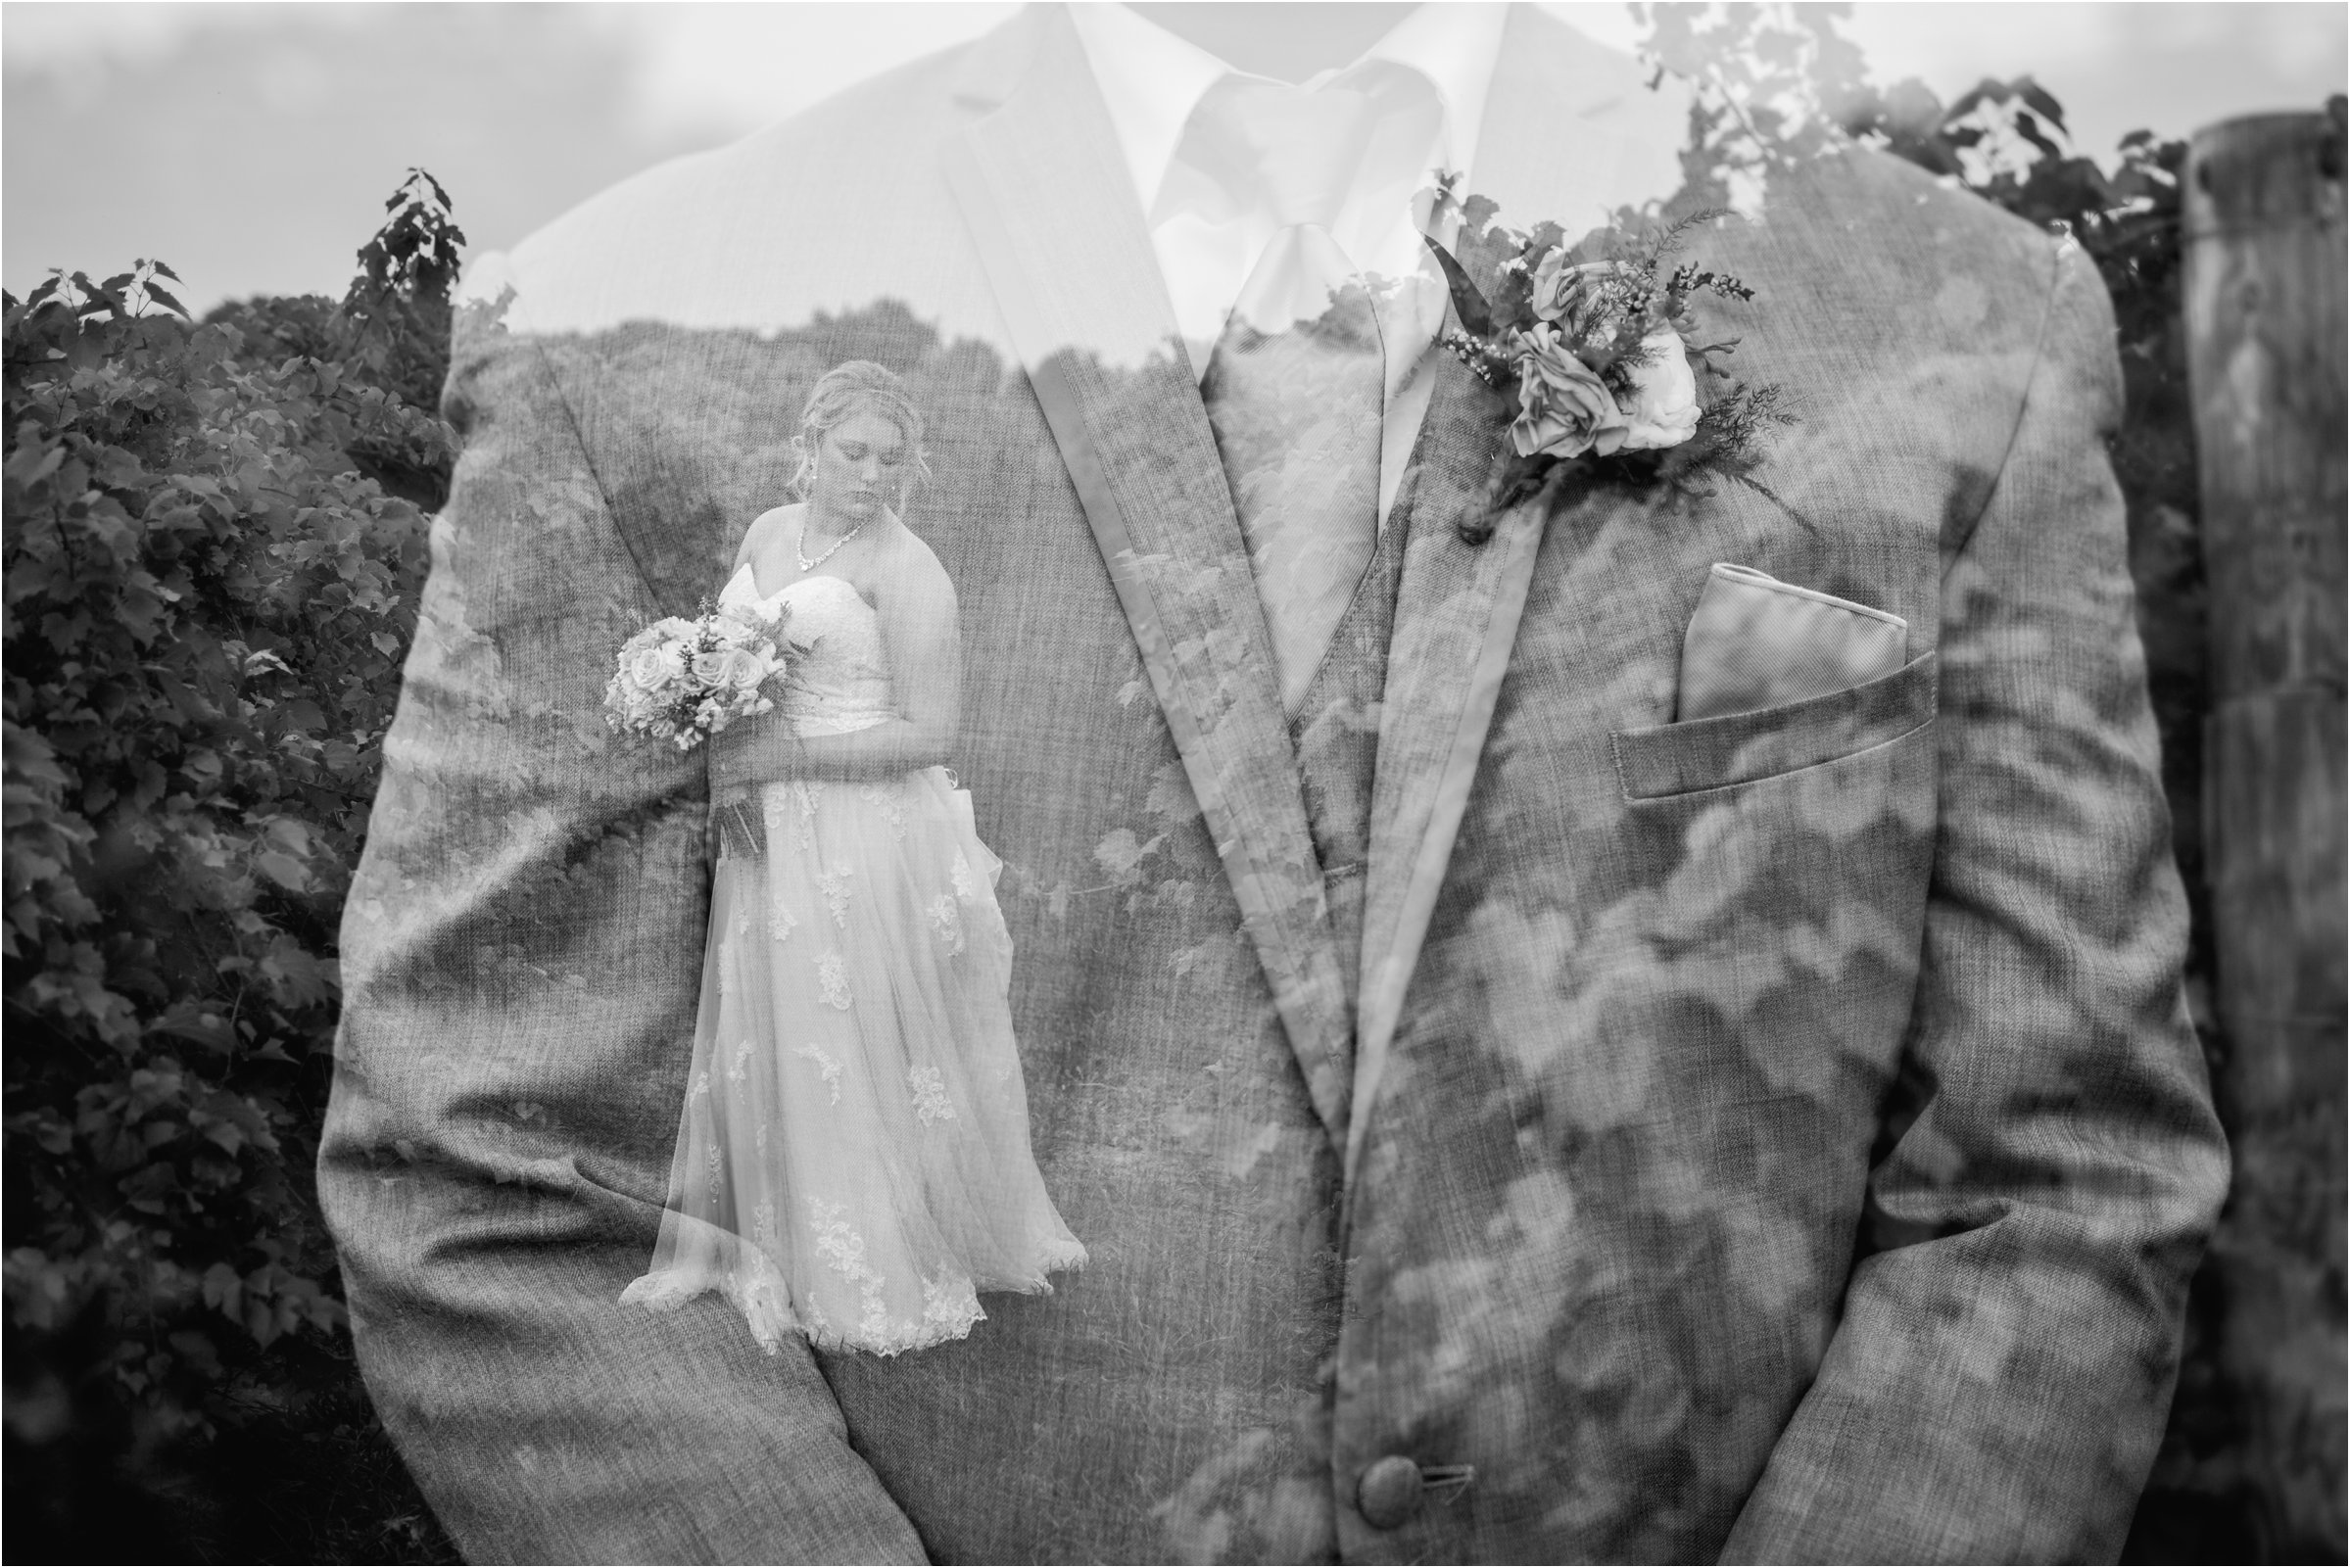 double exposure of the groom's tux along with the bride standing in grape vines